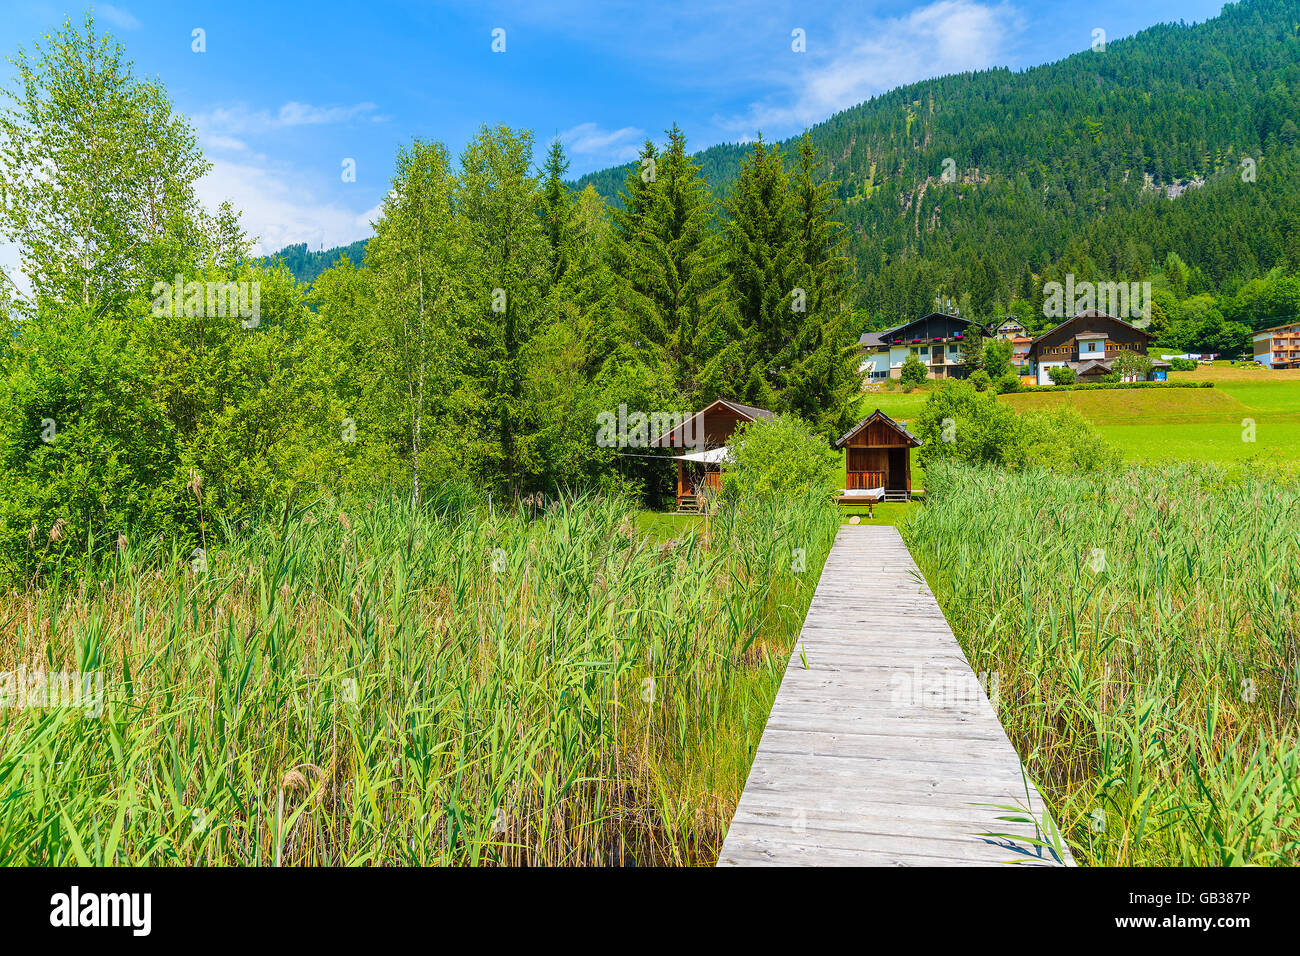 Wooden jetty in grass in alpine village on shore of Weissensee lake in summer landscape of Alps Mountains, Austria Stock Photo